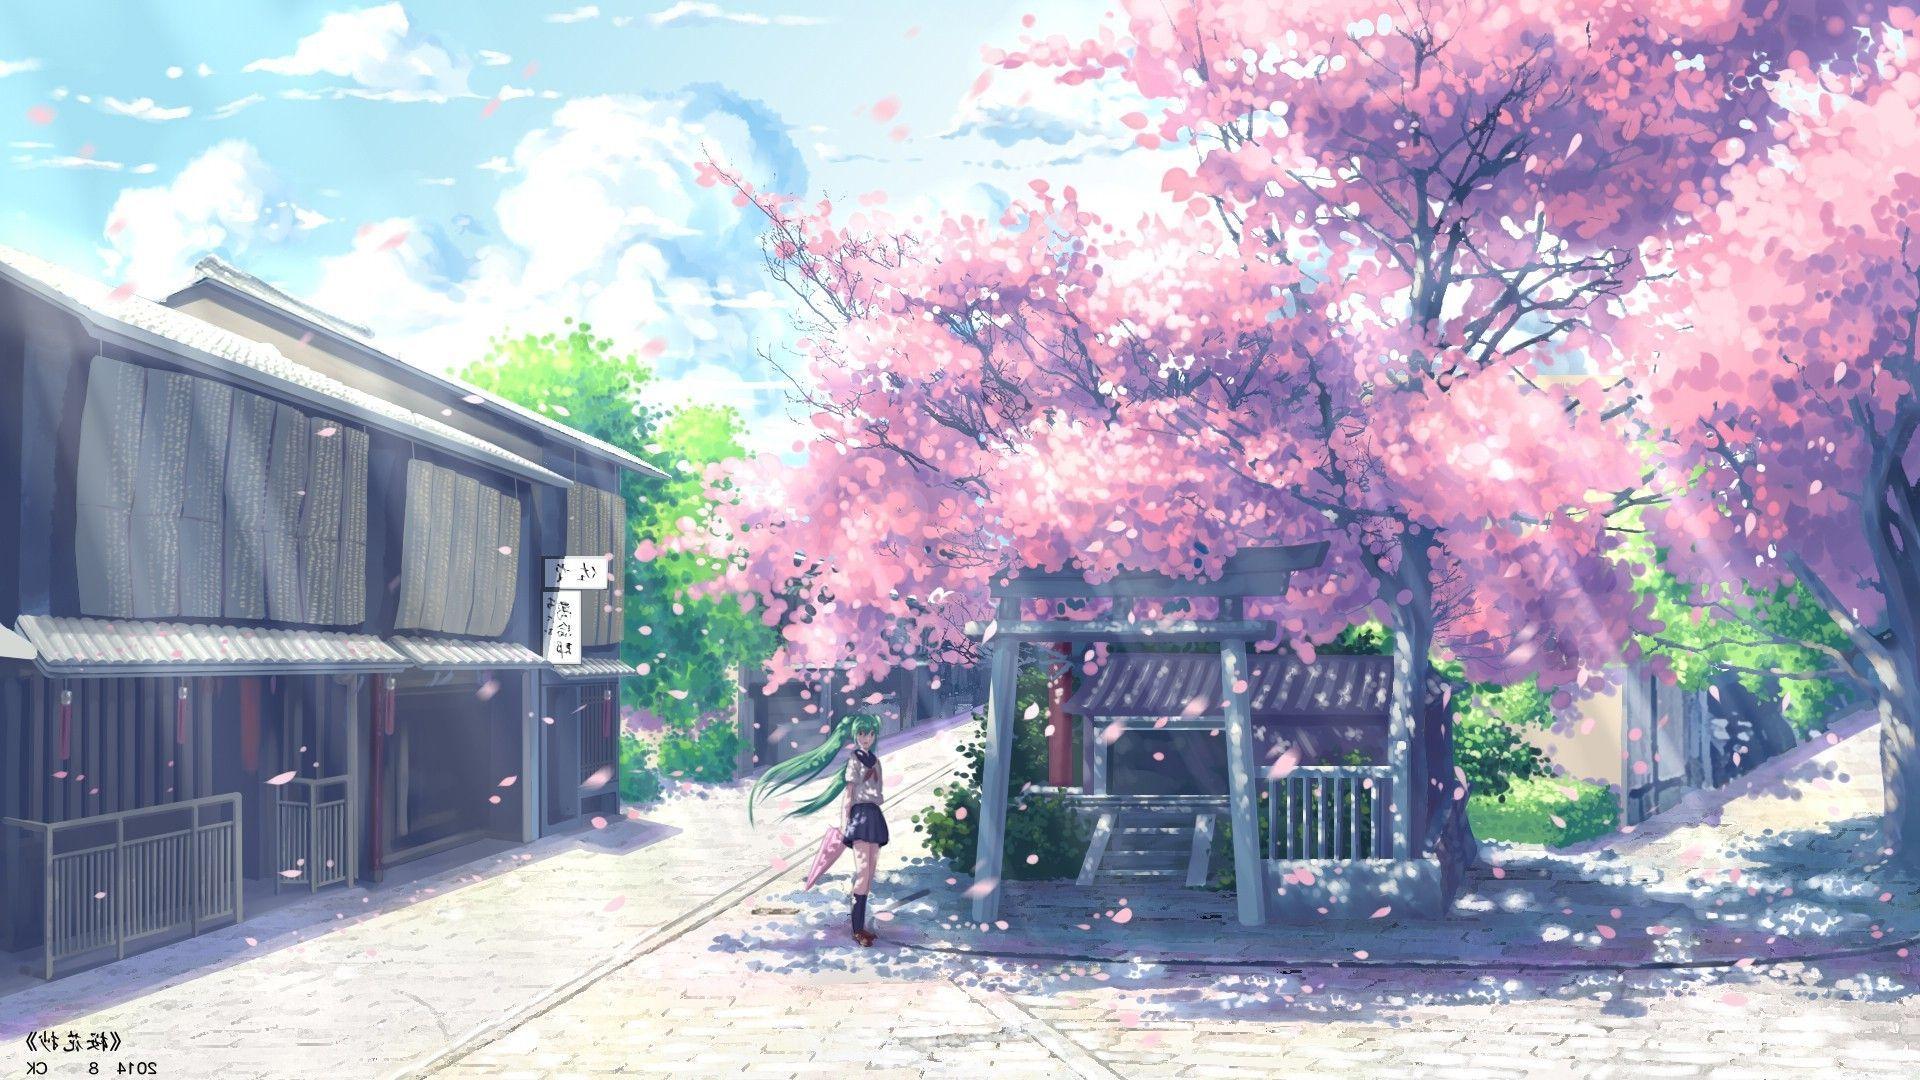 Anime girl in a cherry blossom tree in a small town - Anime, pink anime, anime landscape